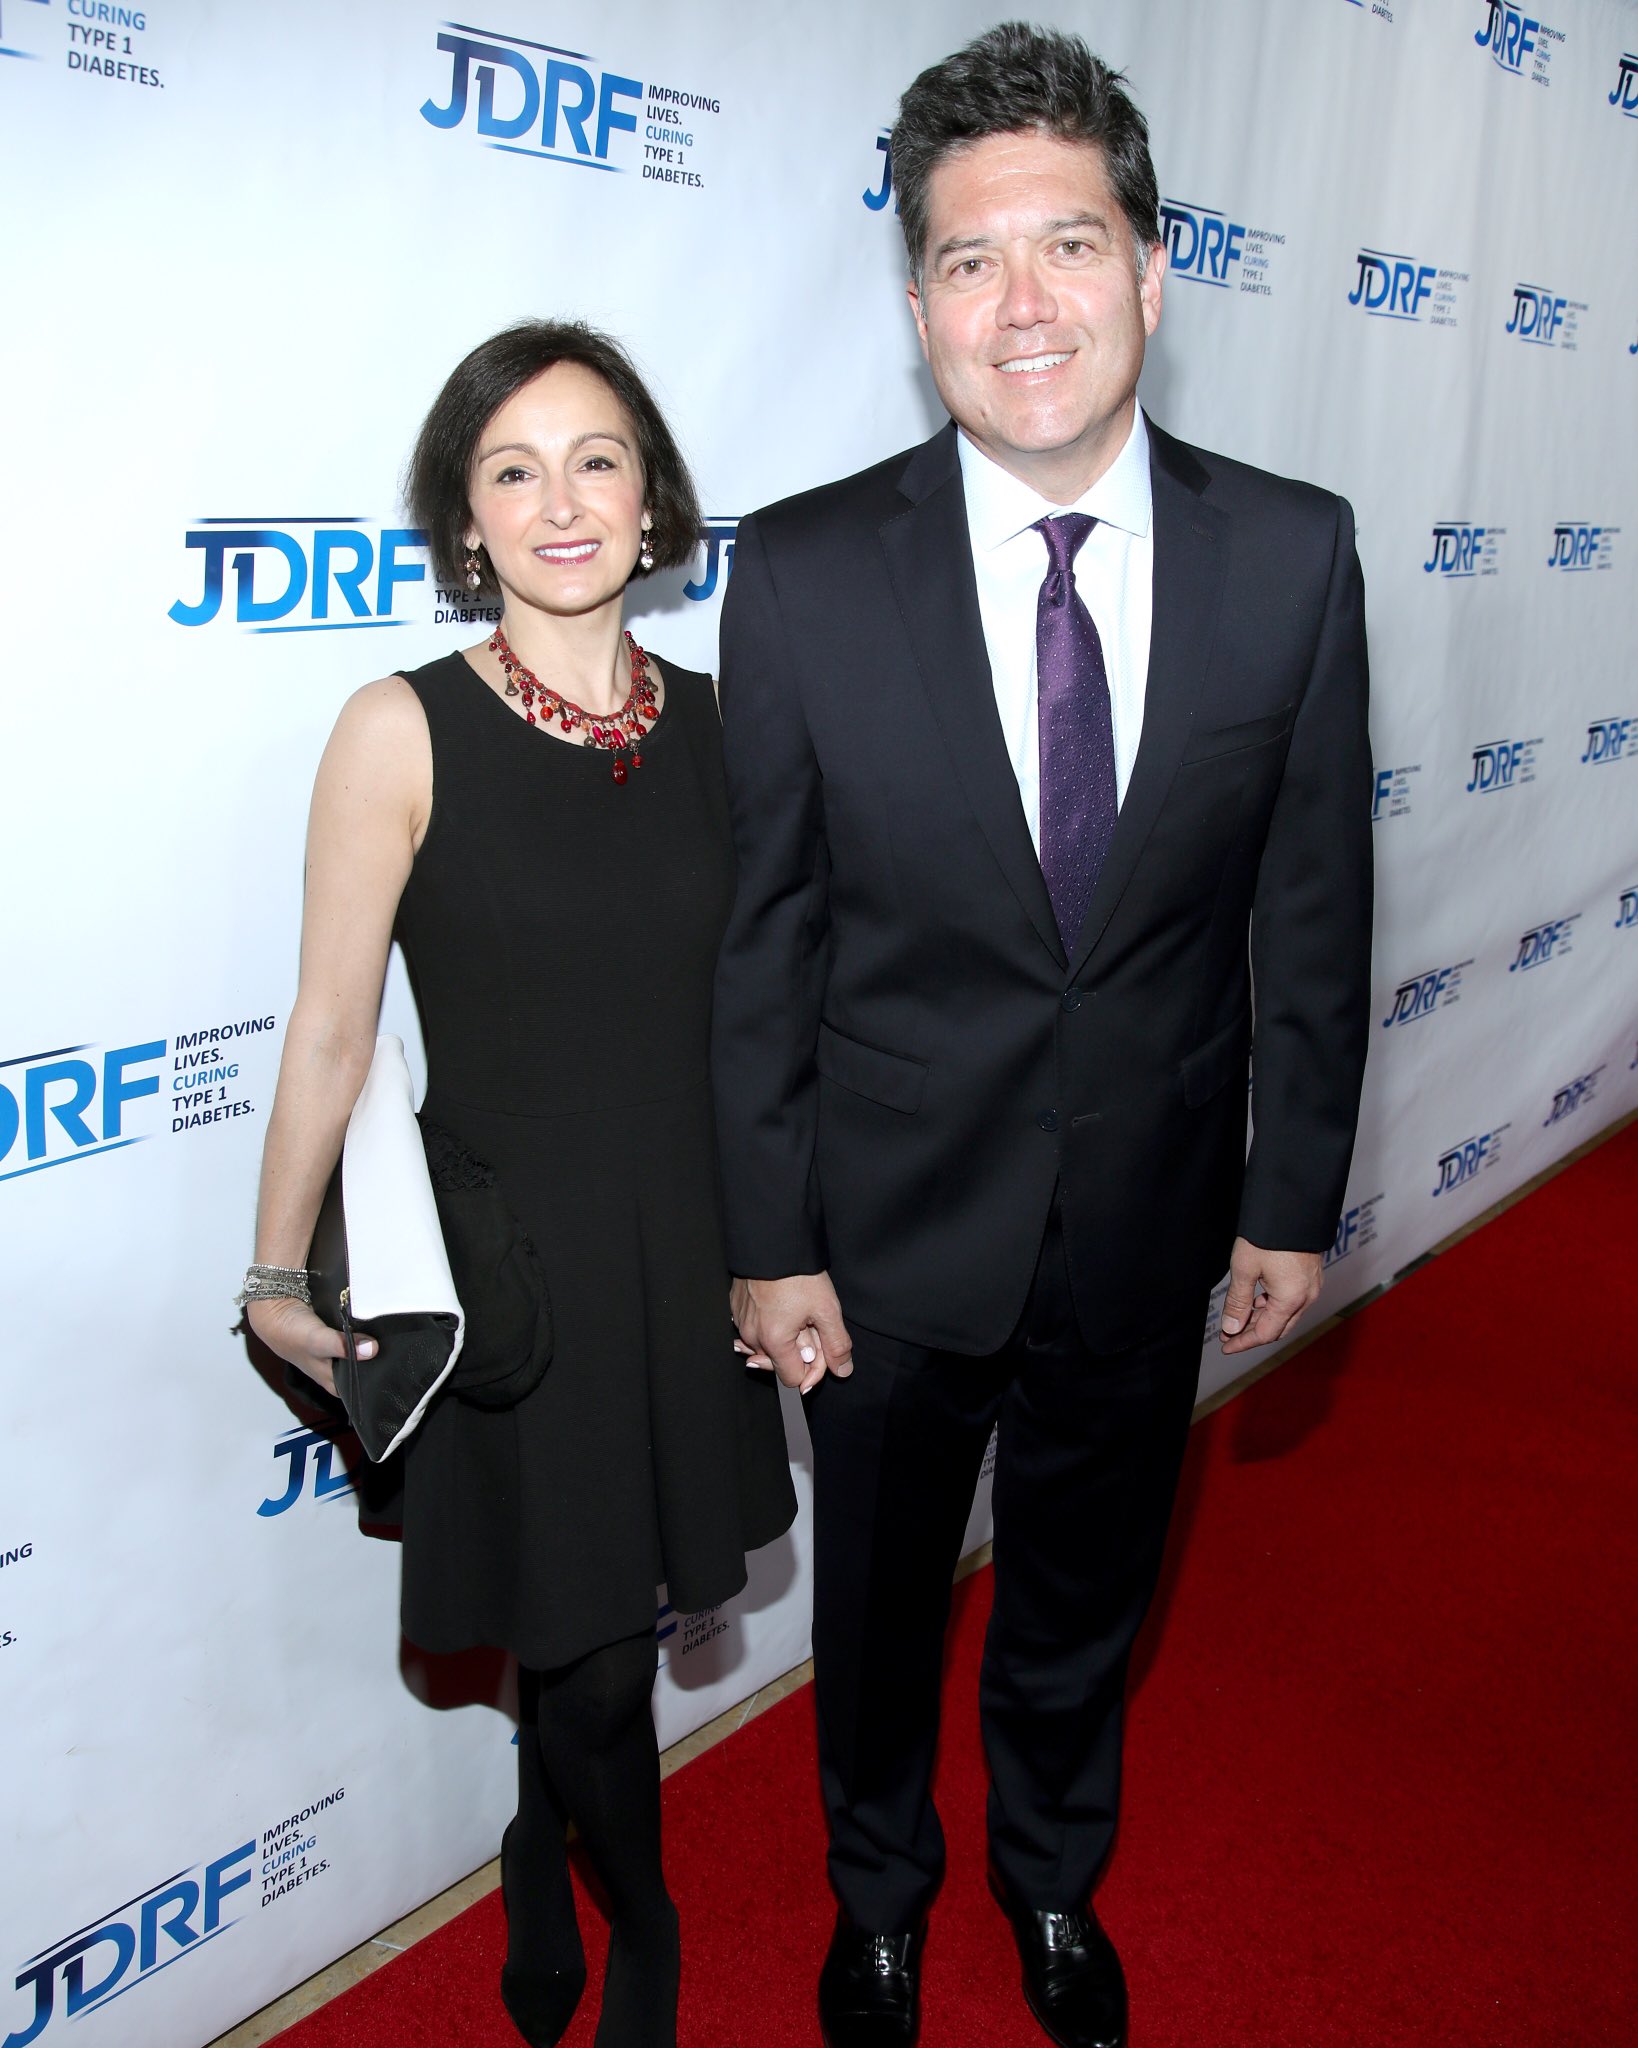 Frank Buckley on Twitter: "Proud to be on the board and to participate in  the @JDRF_LA Imagine Gala w/my beautiful wife Elena Pearce Buckley.  https://t.co/emibNDOv4E" / Twitter